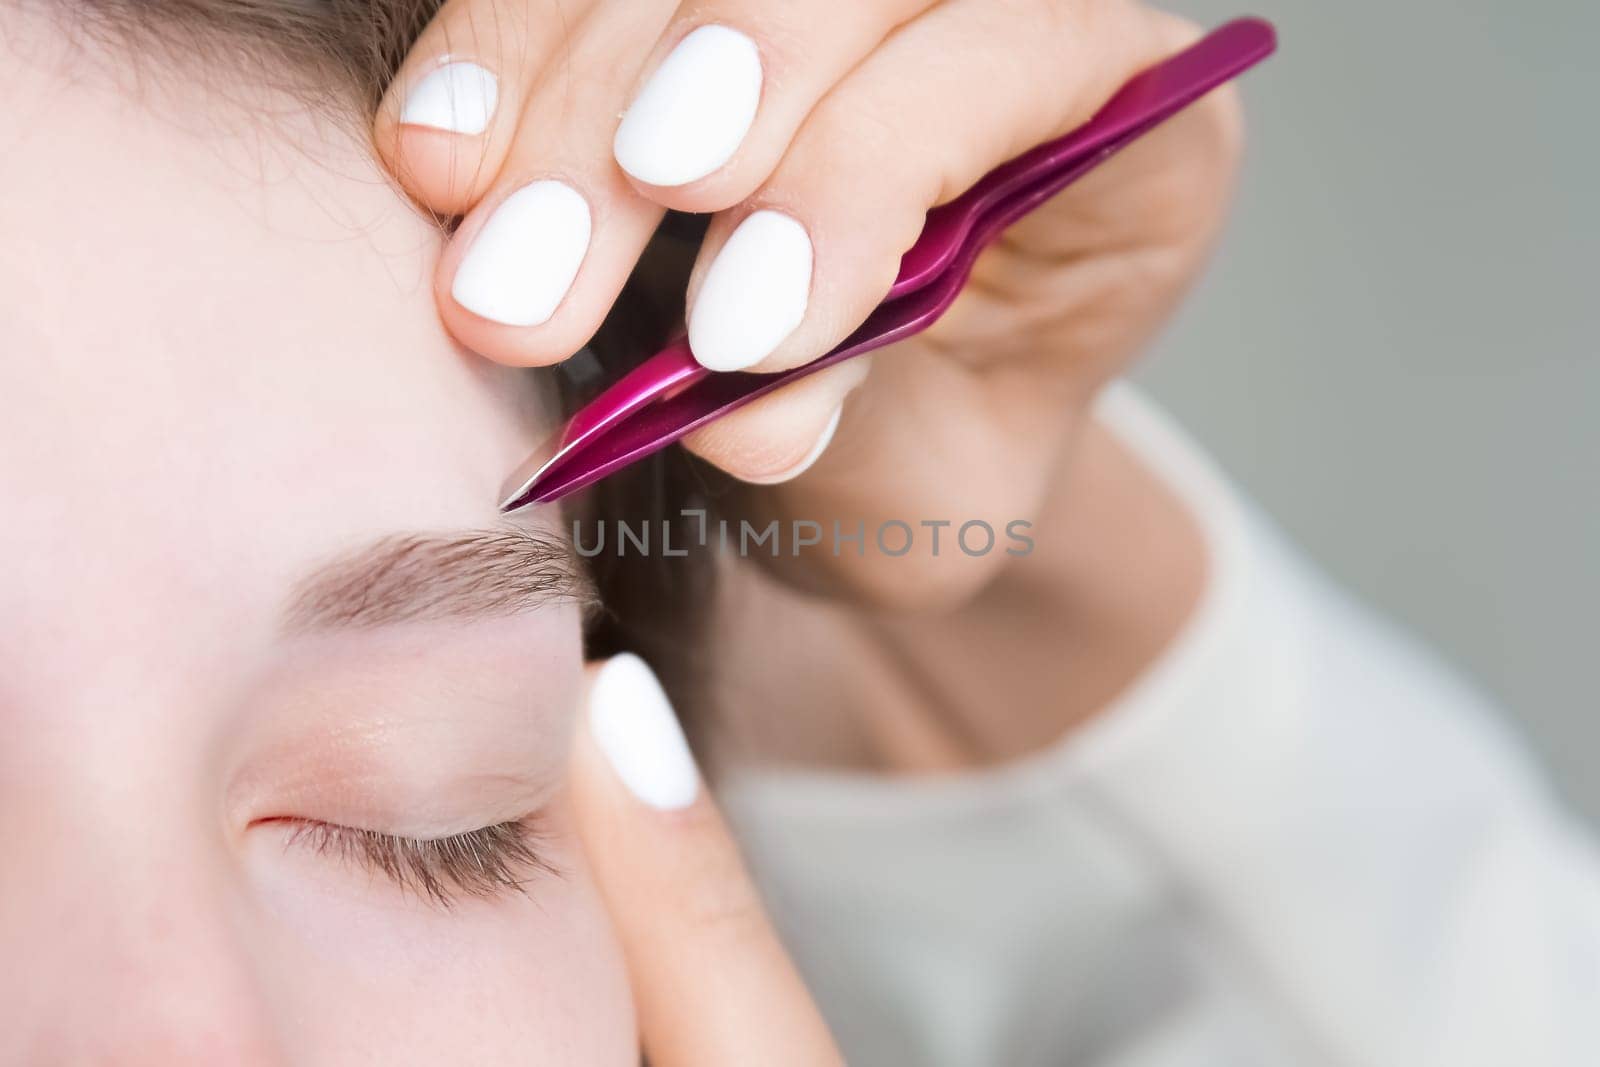 A makeup artist plucks a young woman's eyebrows with tweezers. Beautiful thick eyebrows close-up. Professional makeup and cosmetological skin care in a beauty salon